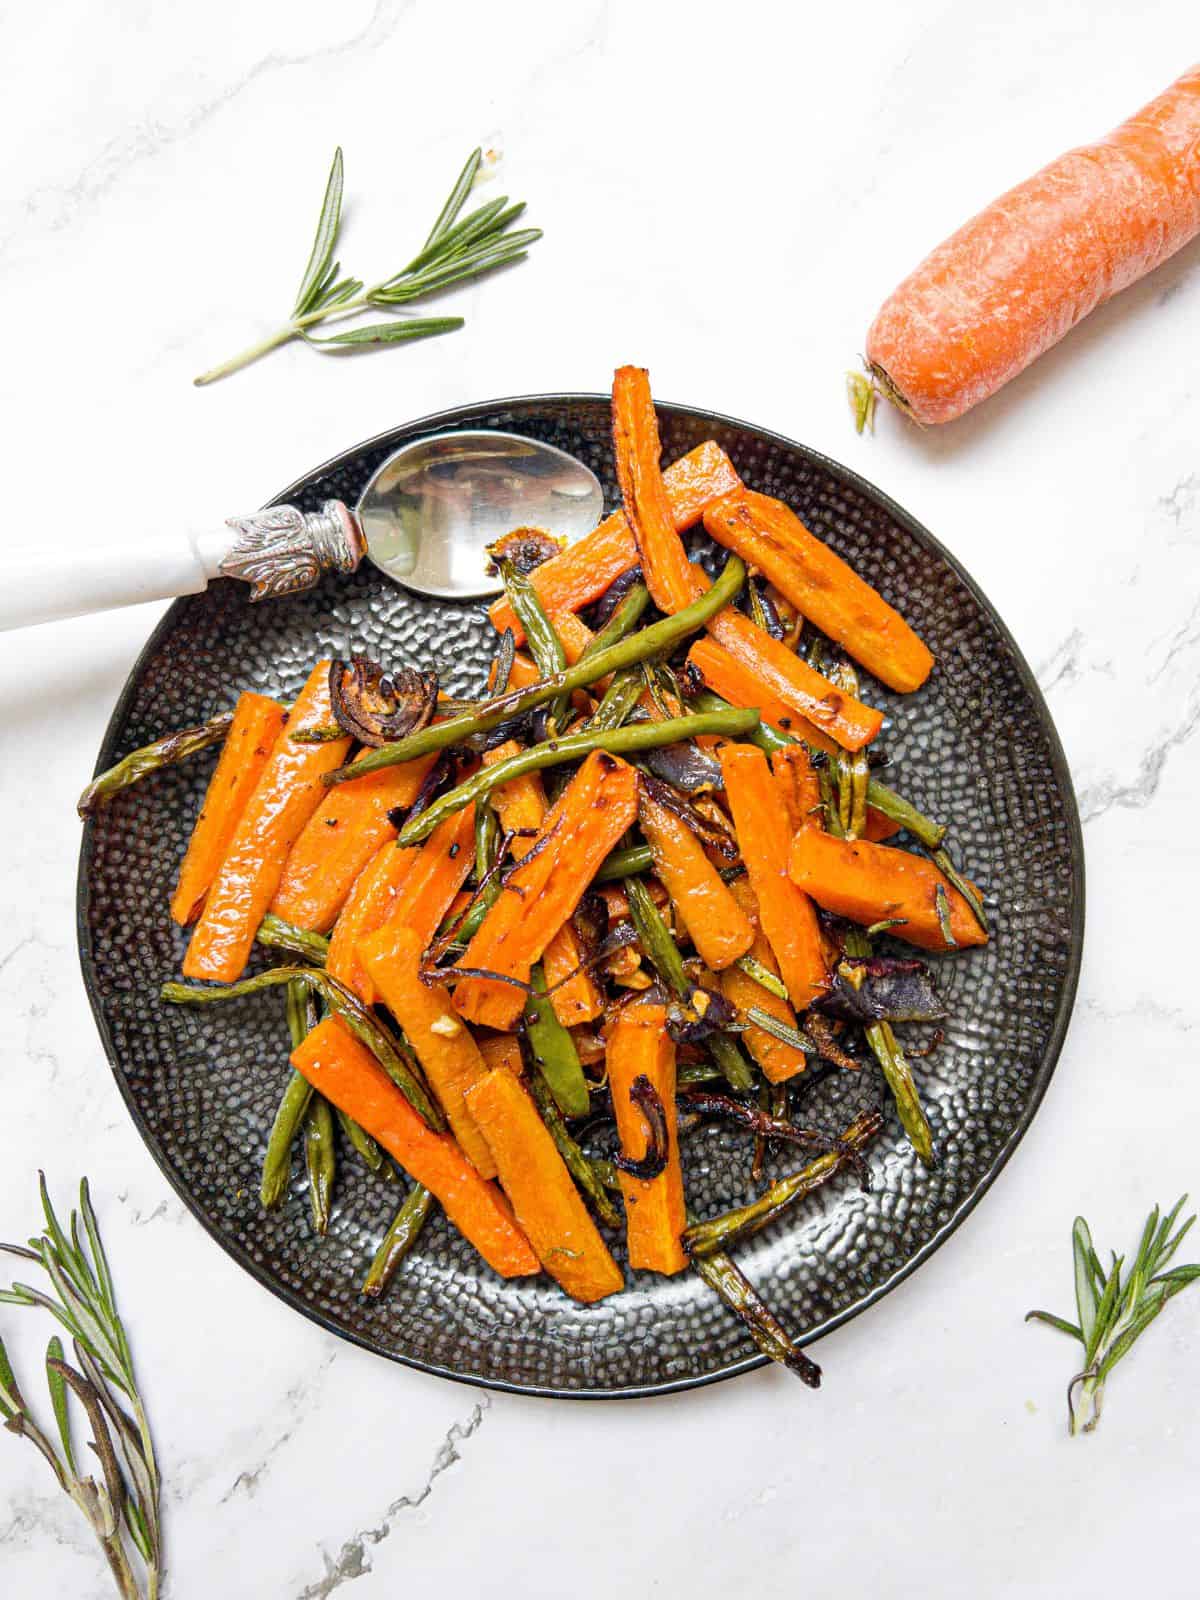 Roasted carrots and green beans on a black plate with a rosemary and carrot garnish.